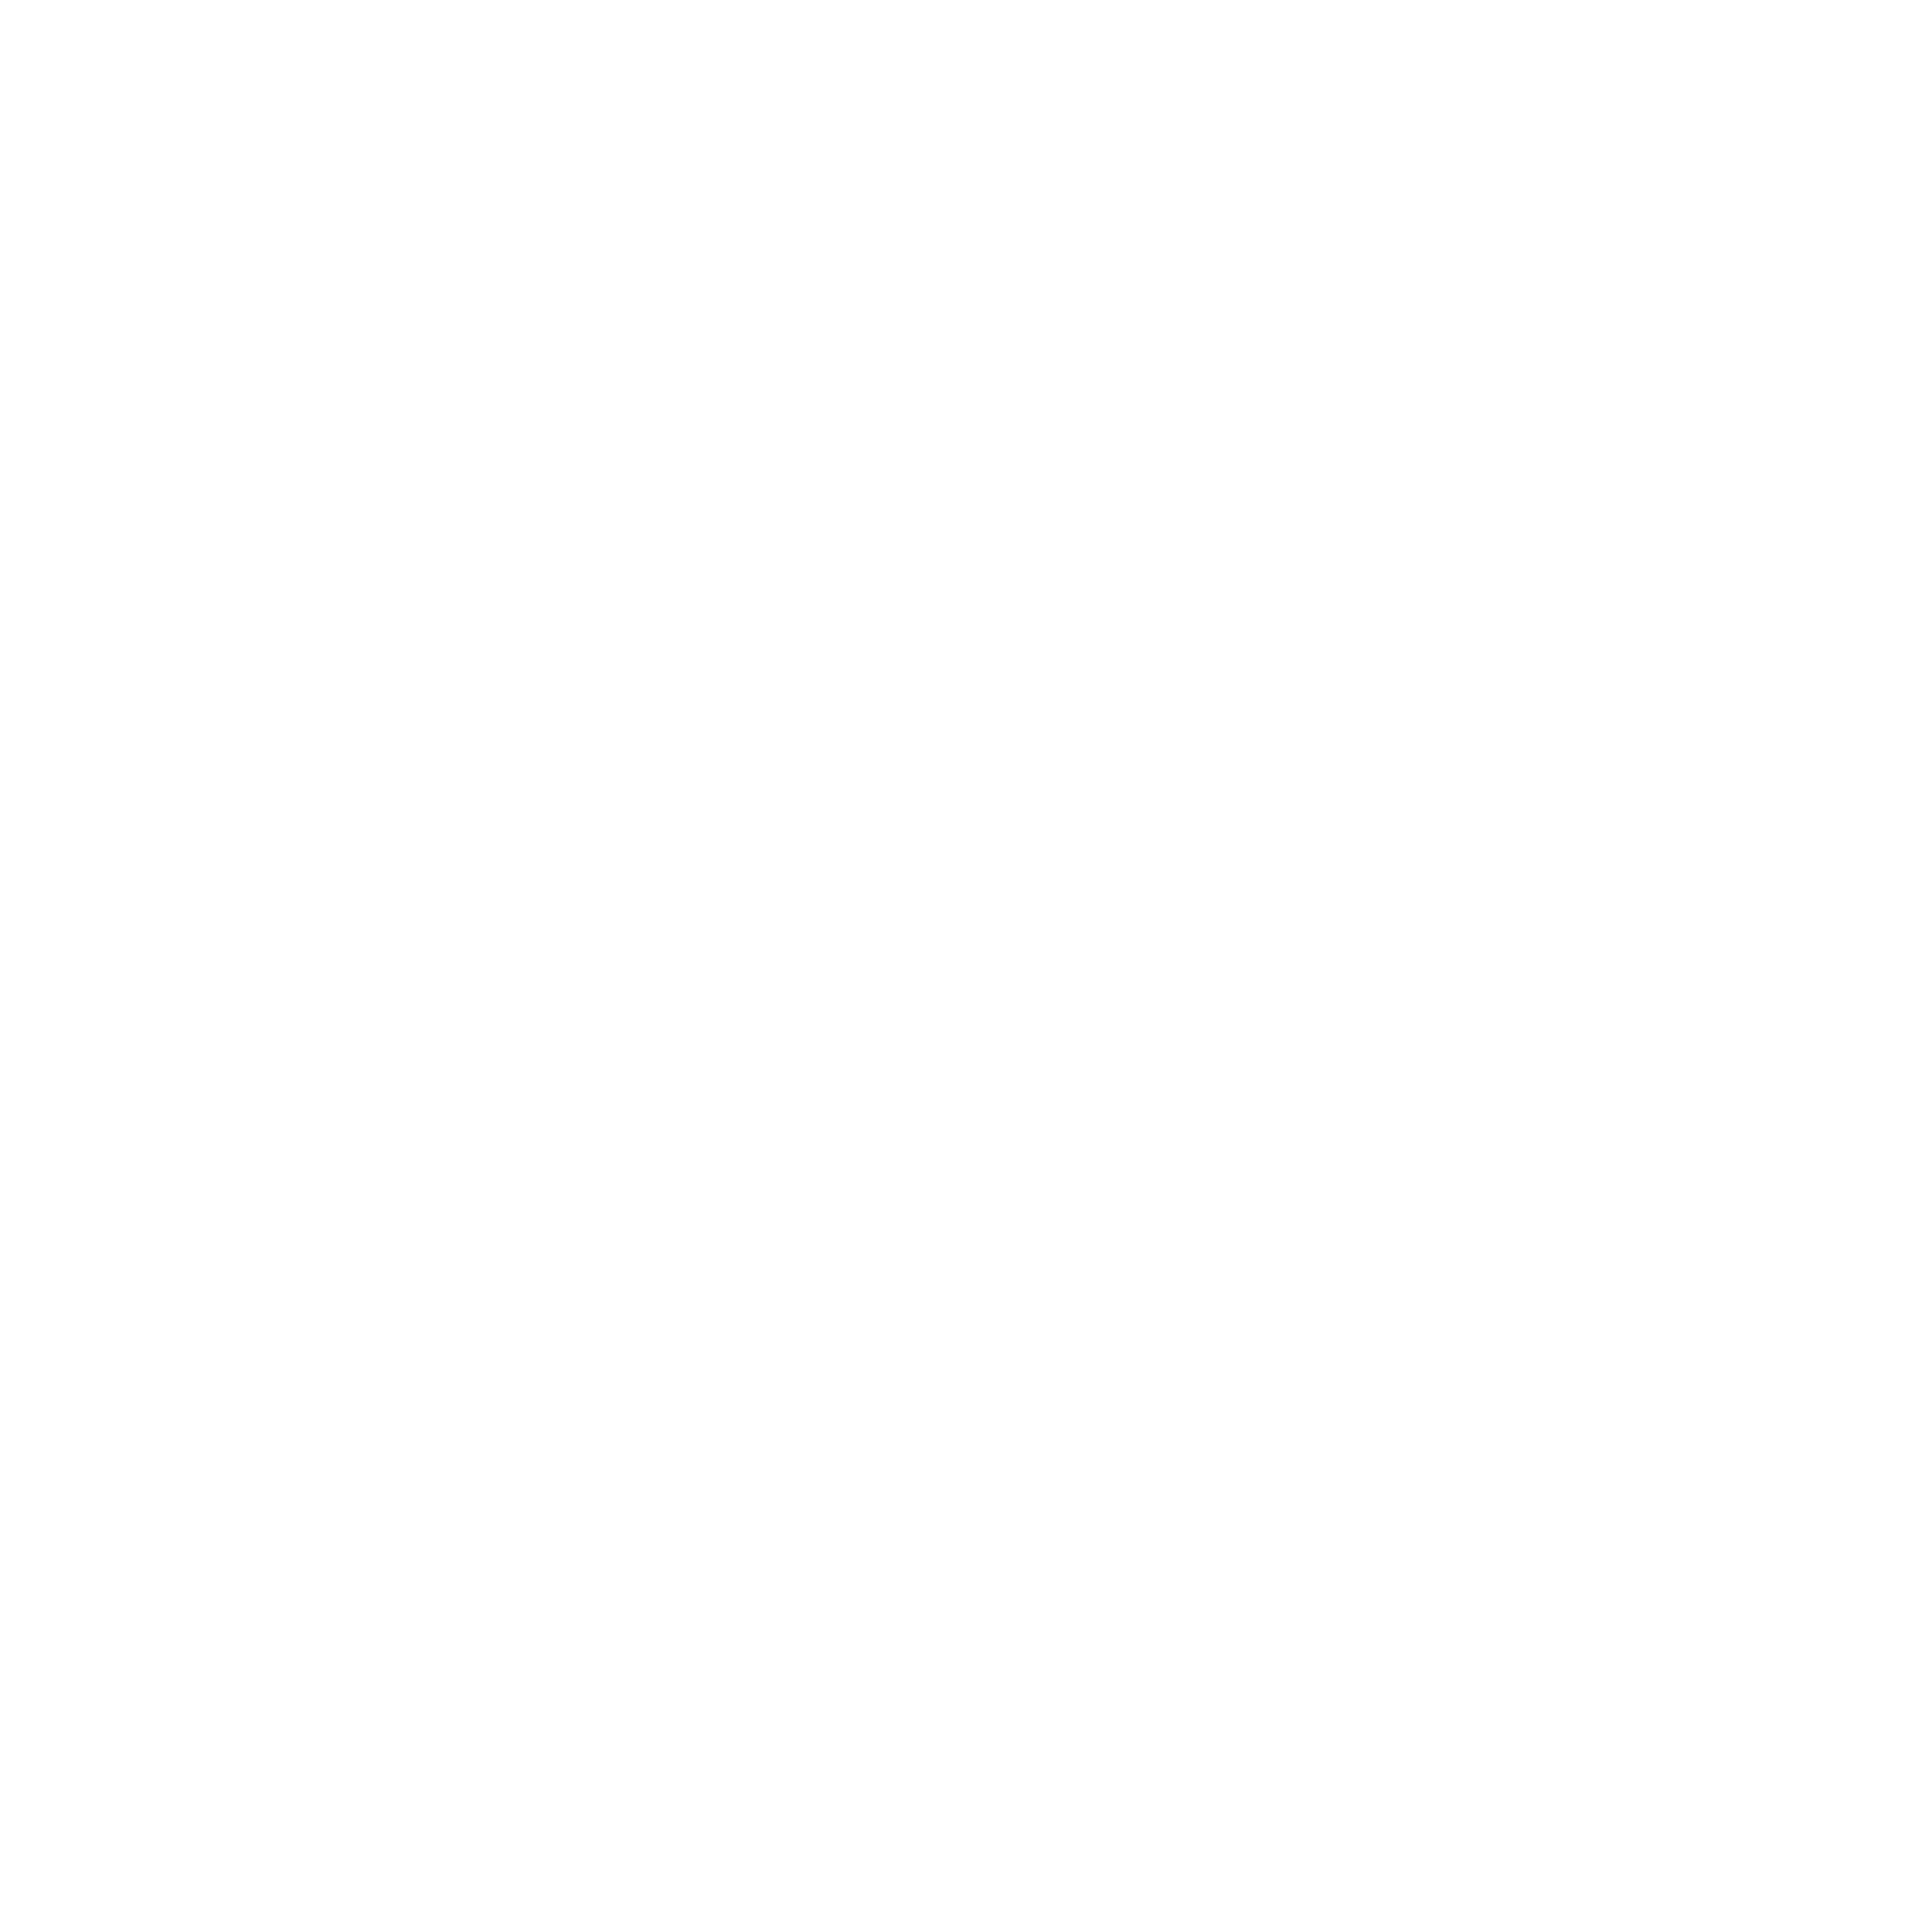 Vulture Peak is a pioneering Launchpad and an Investment fund focusing on blockchain games, NFTs, metaverse, DeFi, and other developments in the blockchain space.

The participants only have to deposit a minimum amount of Vulture Peak tokens to get whitelisted and it requires no staking or locking up of tokens. It is on a First Come First Served basis!